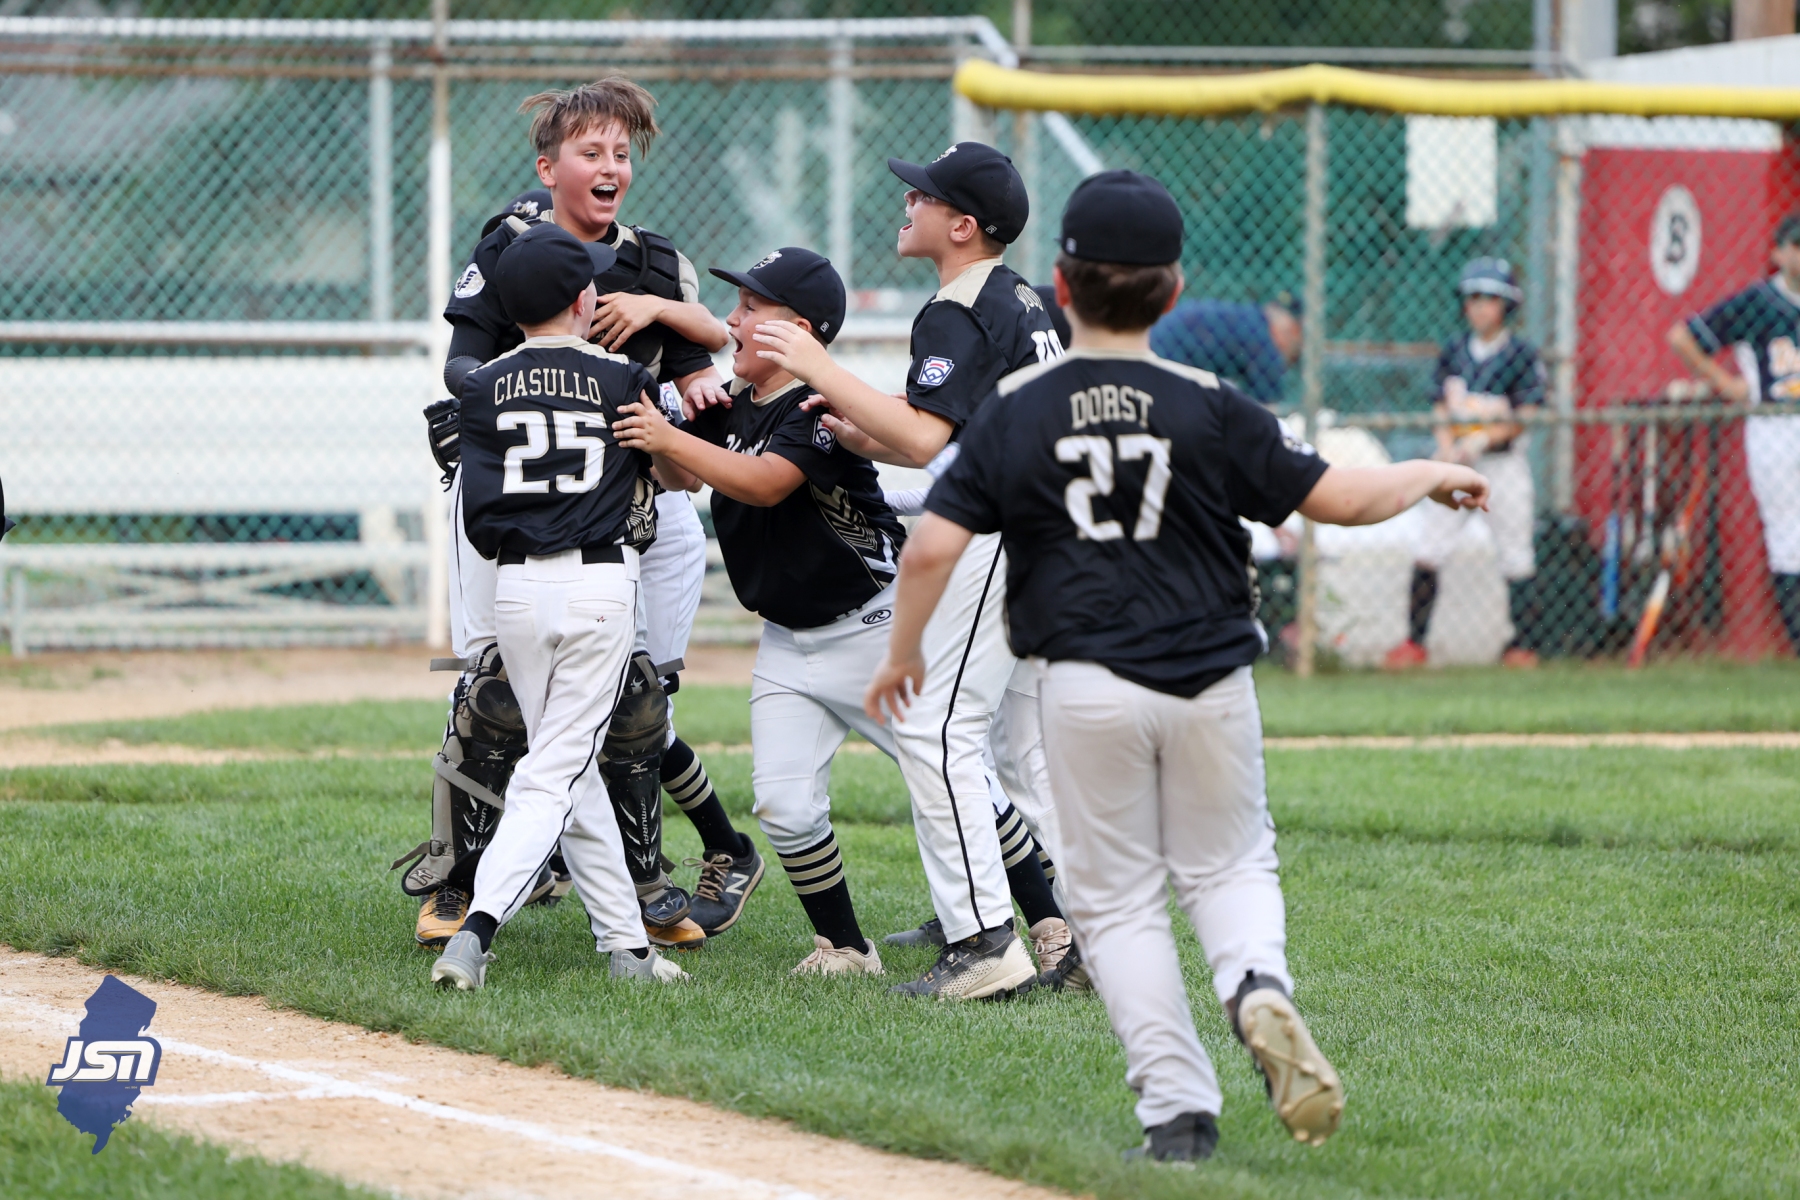 IMAGES: East Hanover Wins 2023 New Jersey Section 1 Little League